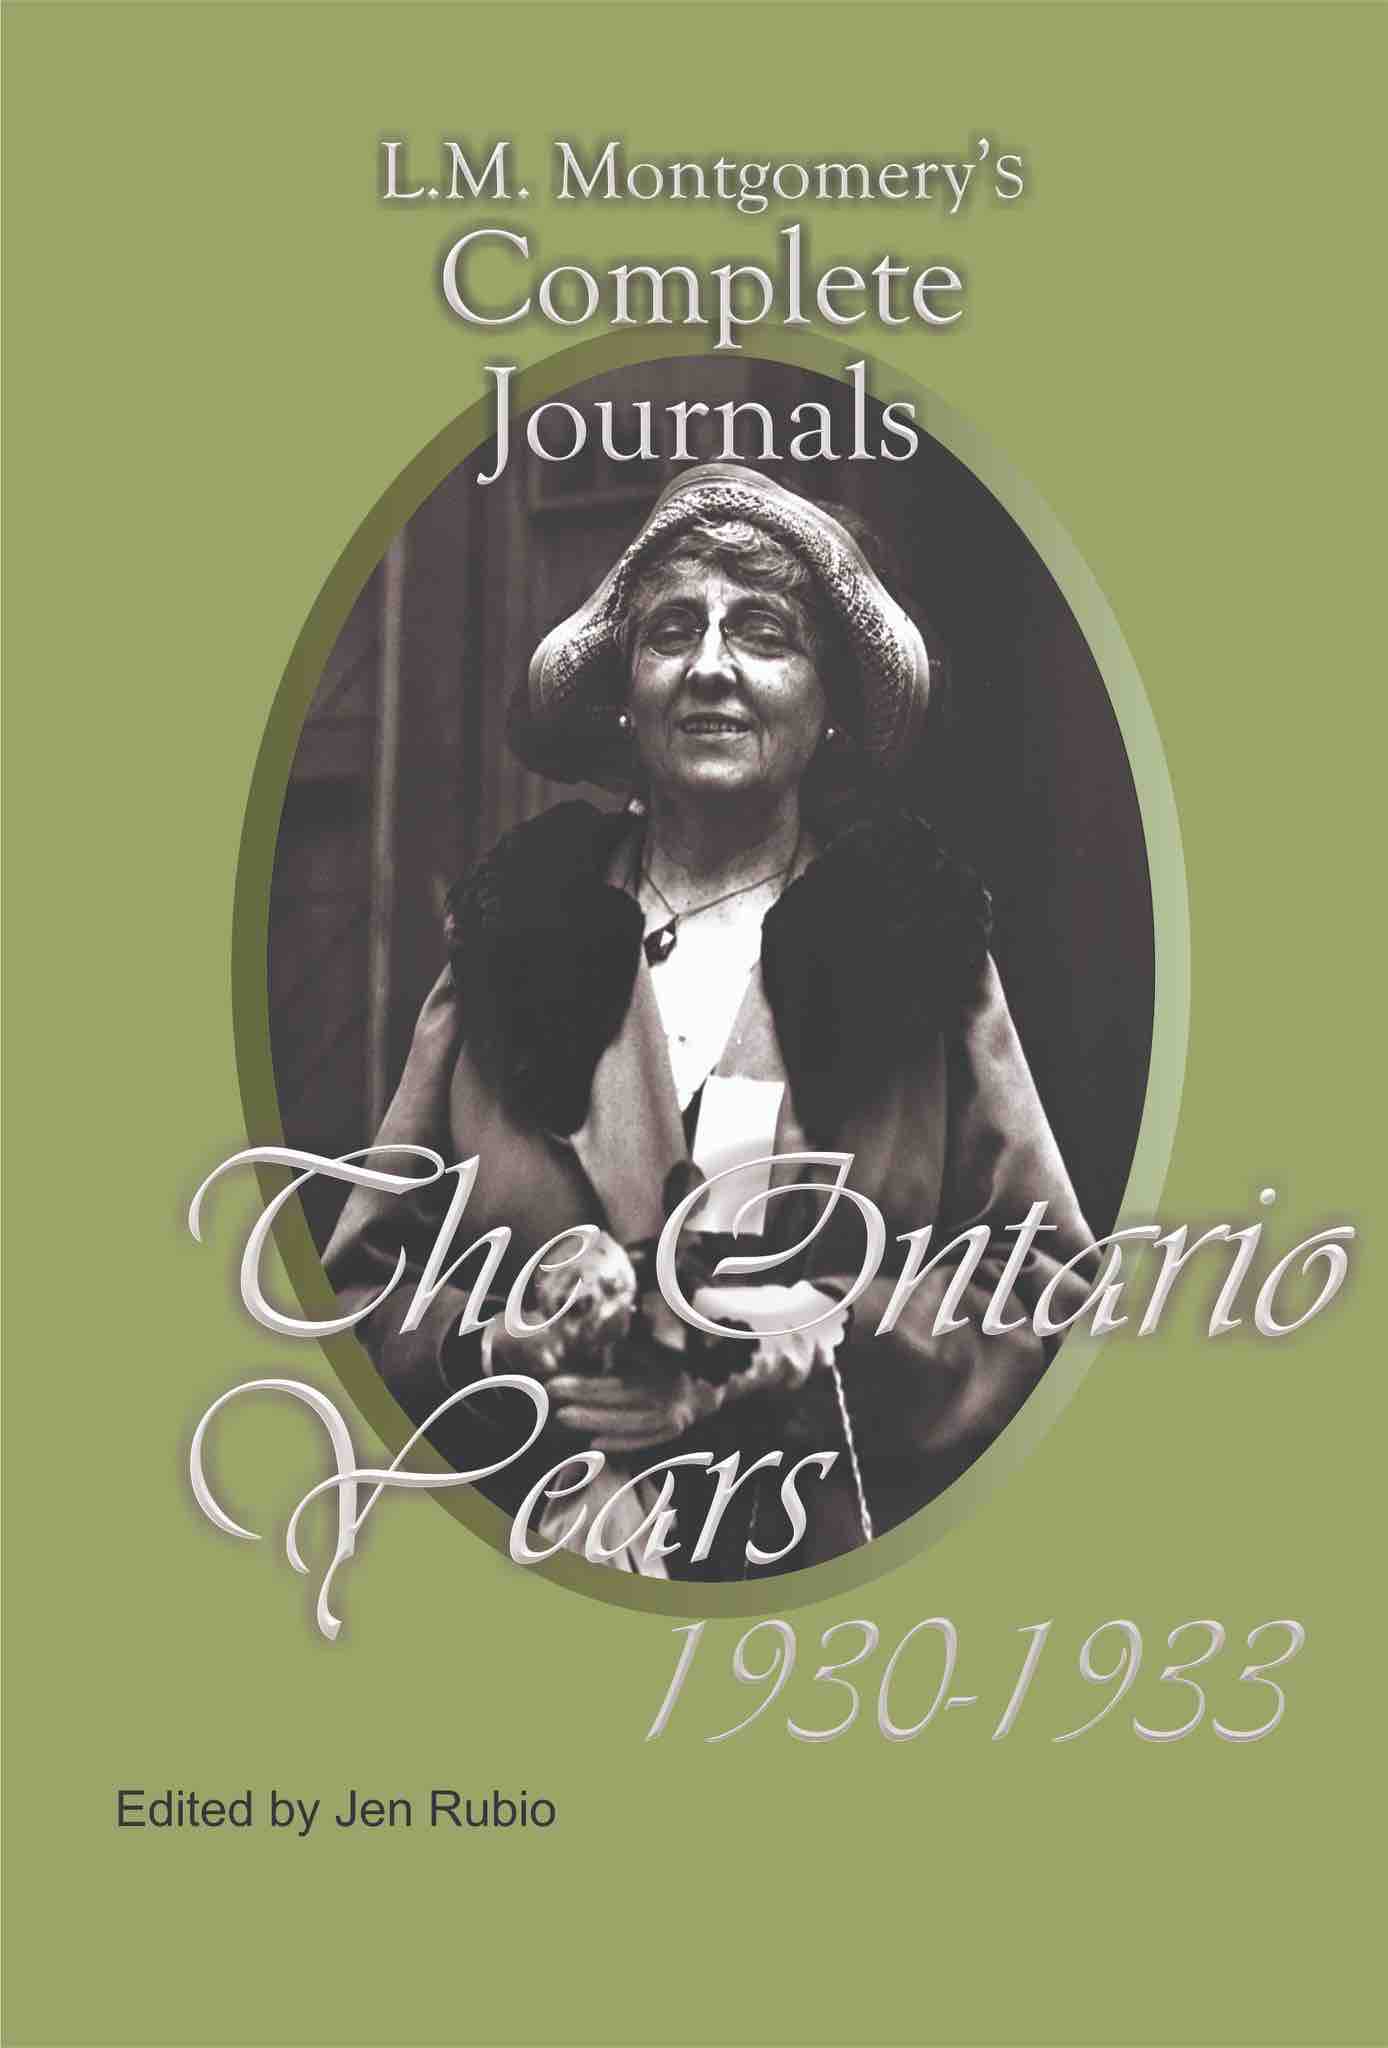 Cover art for L.M. Montgomery's Complete Journals: The Ontario Years, 1930-1933